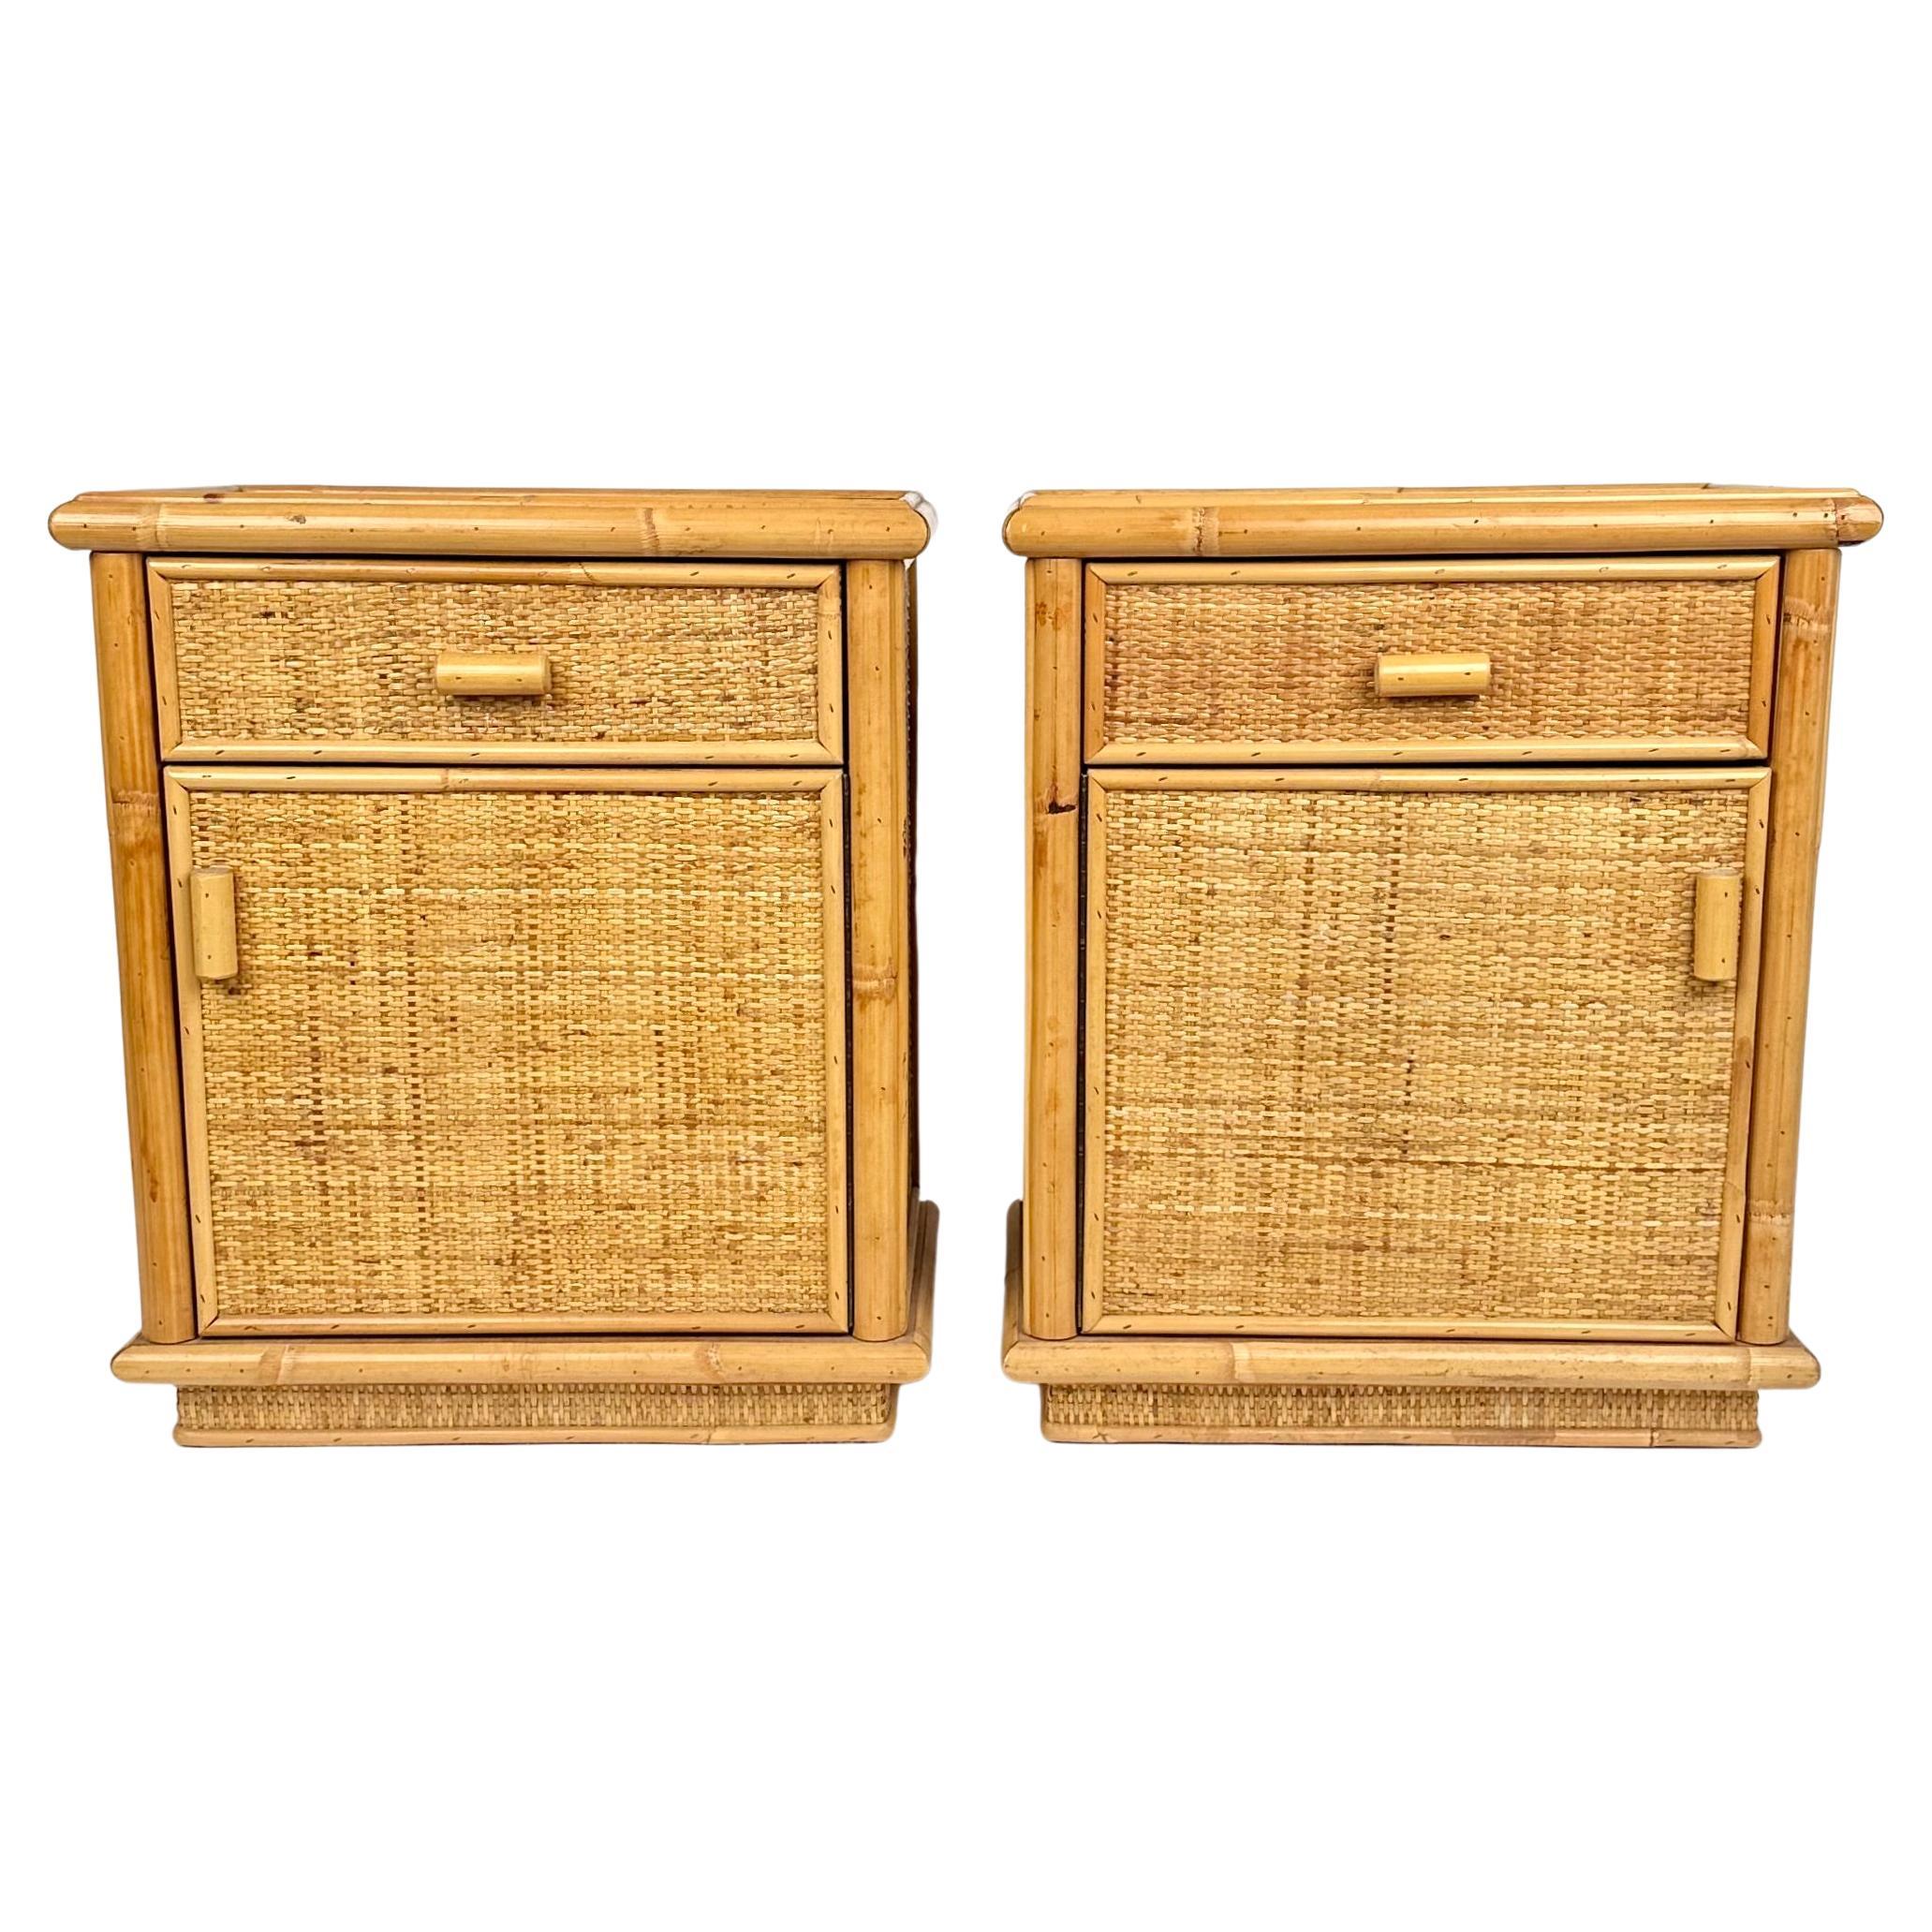 Midcentury Pair of Bed Side Tables Nightstands in Bamboo & Rattan, Italy, 1970s For Sale 7